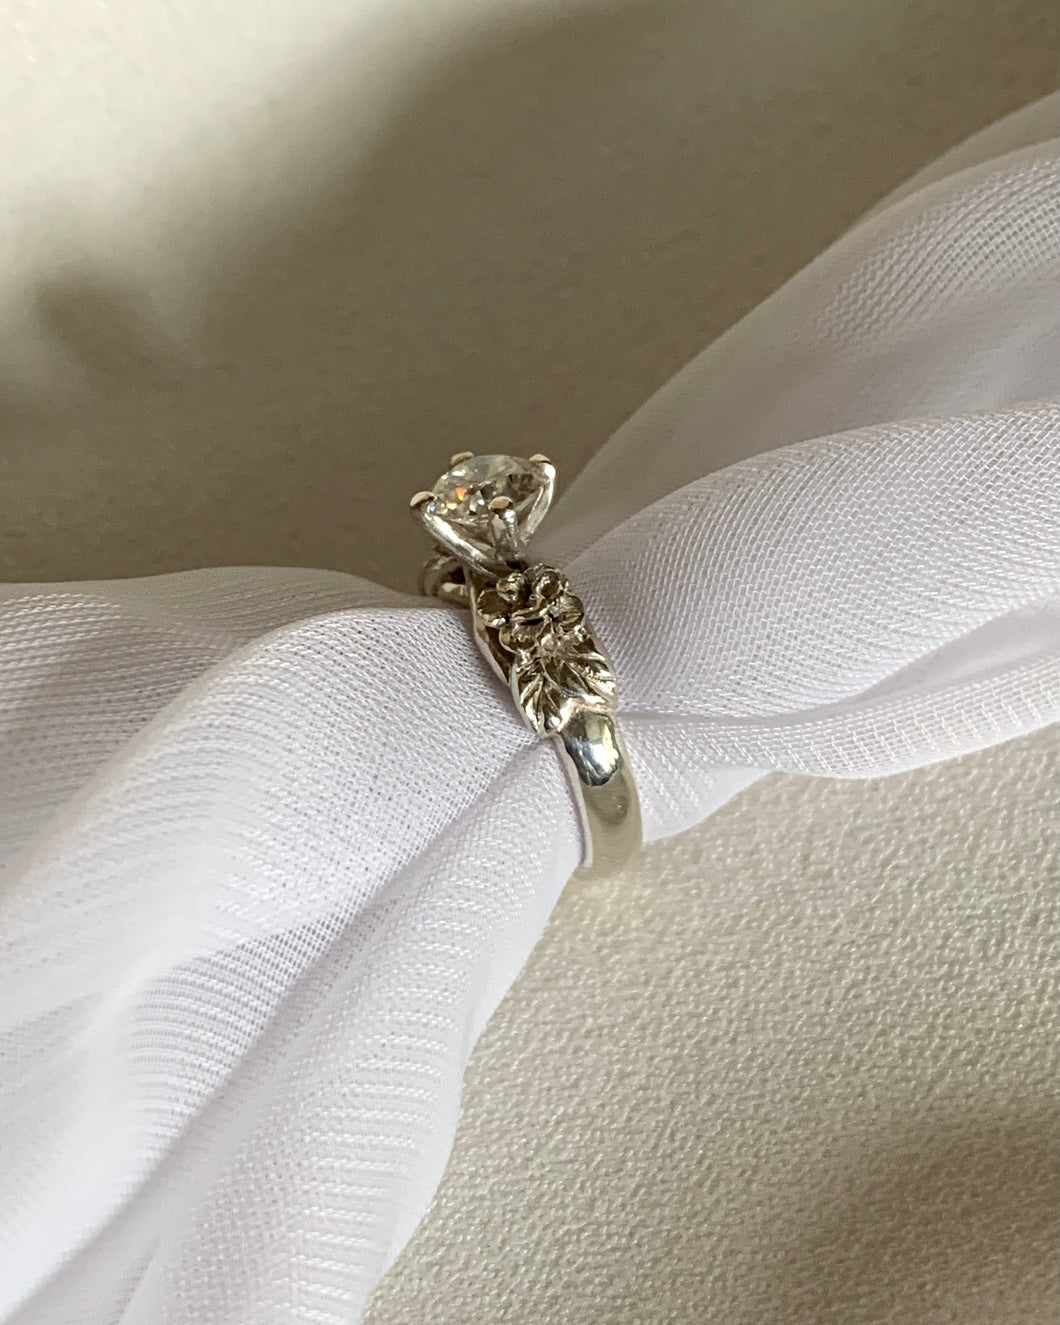 A round solitaire ring with carved roses on the side, set in white gold.